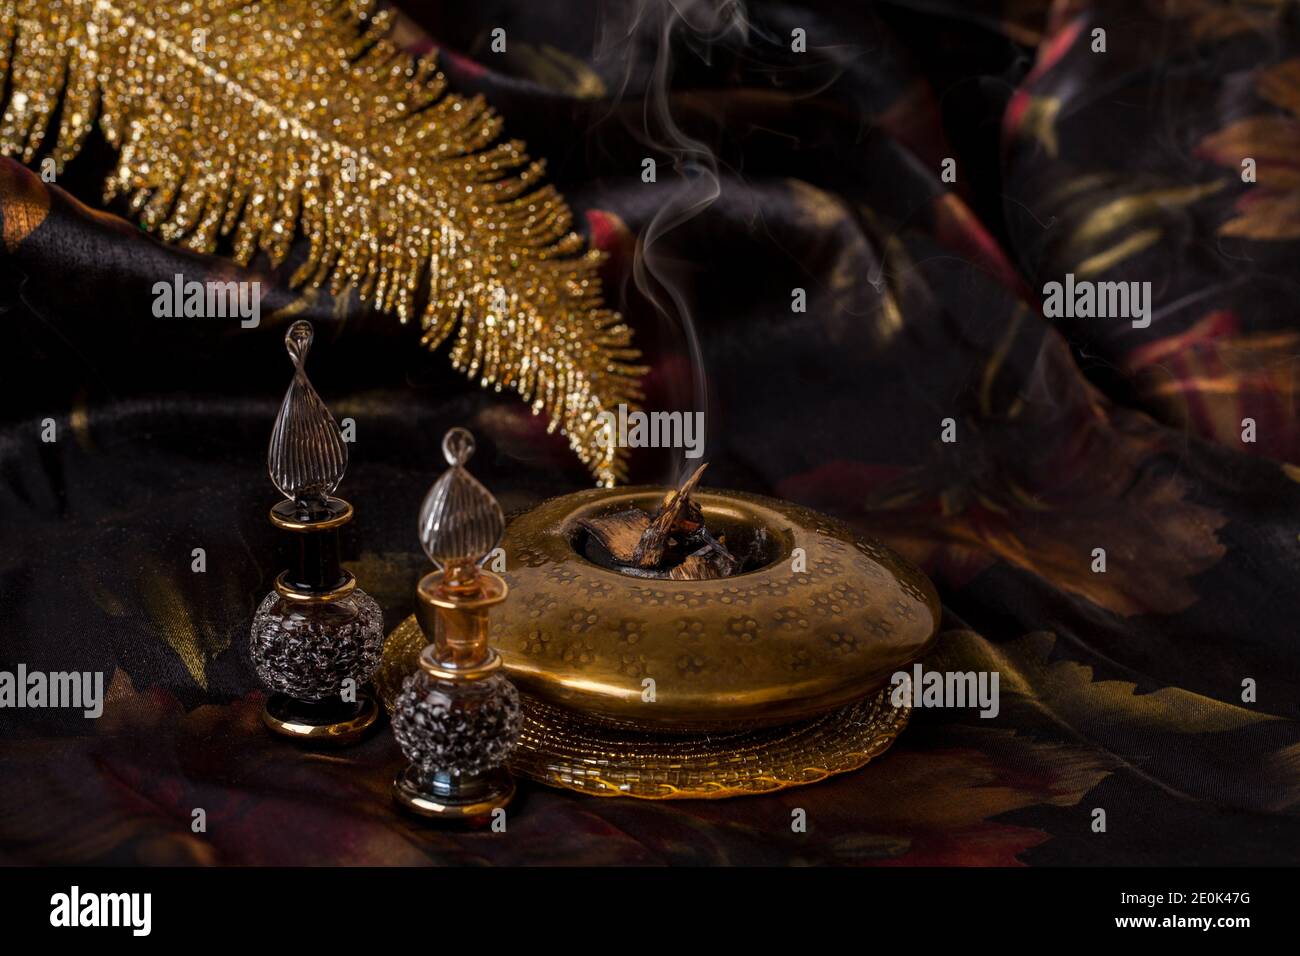 Agarwood, also called aloeswood, essential oil and burning incense chips Stock Photo